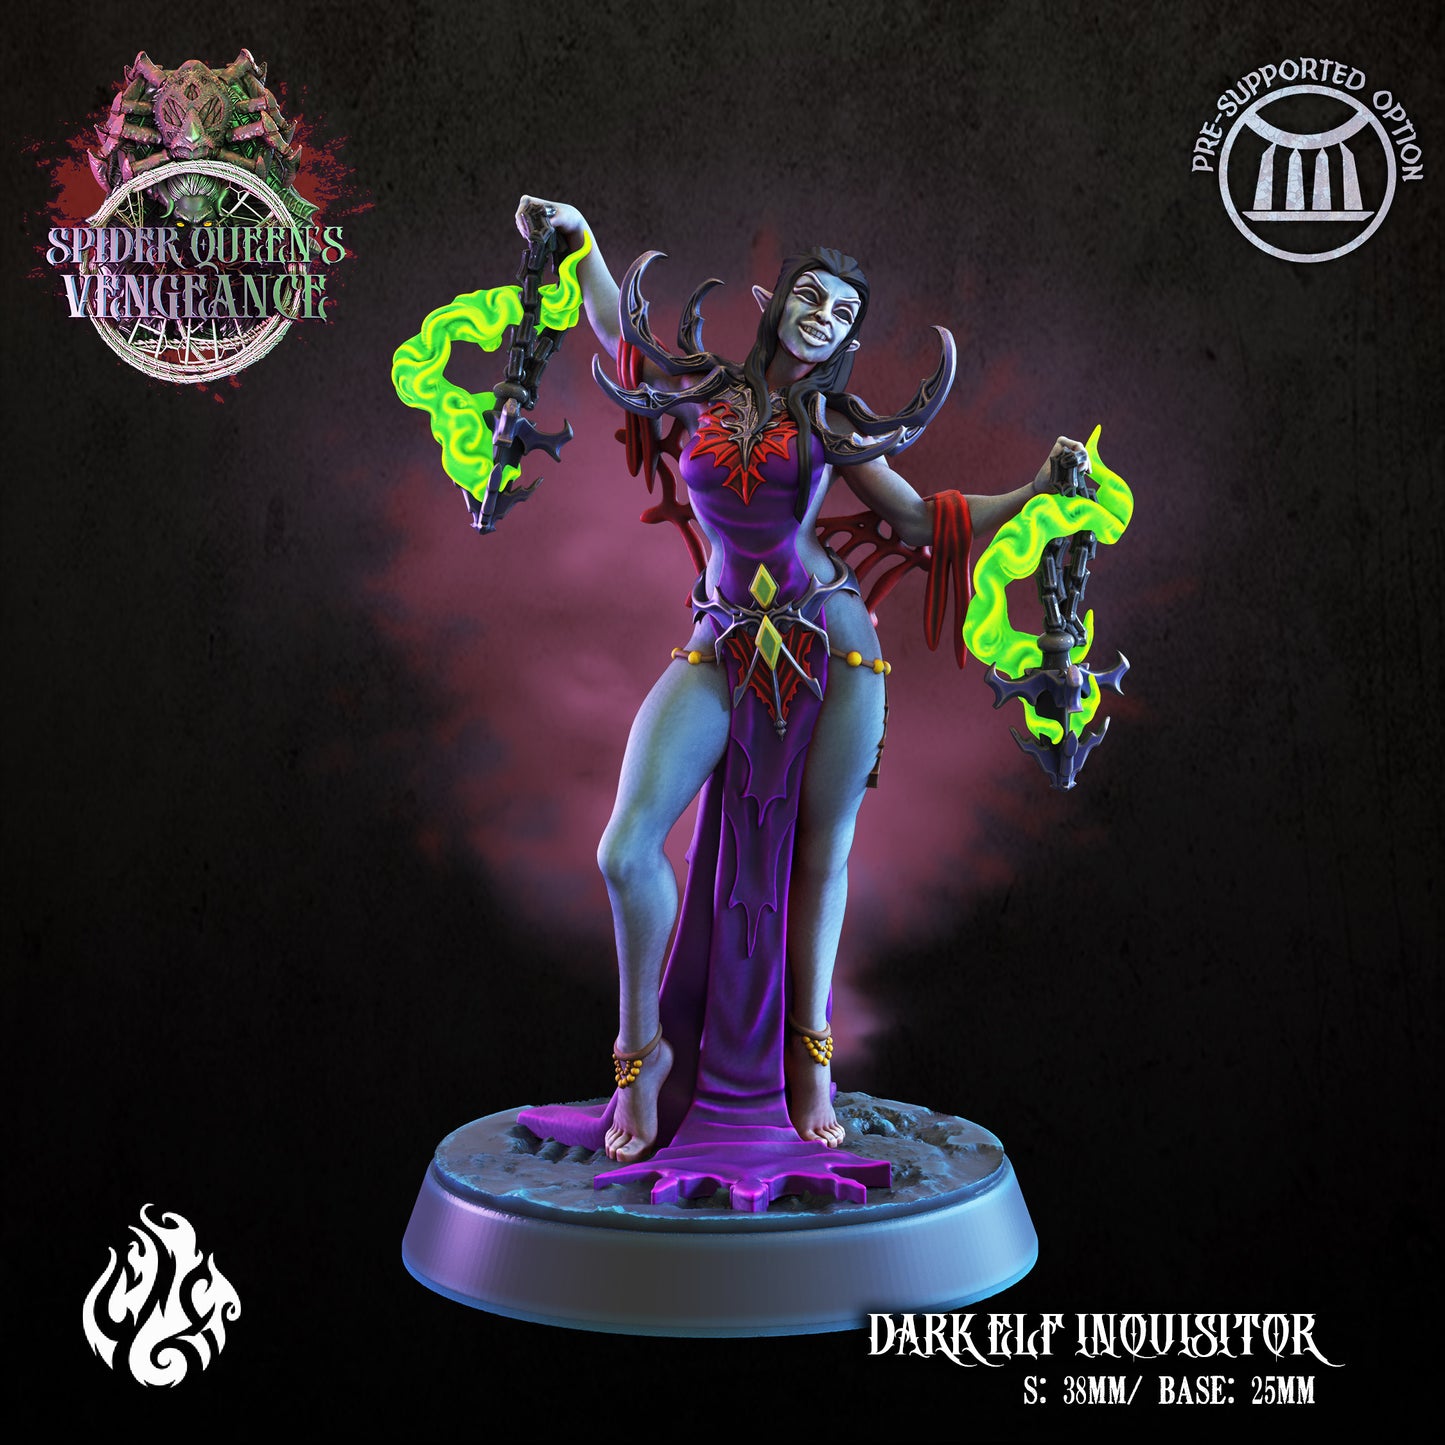 Dark elf Inquisitor Spider Queen's Vengeance Series from Crippled God Foundry - Table-top gaming mini and collectable for painting.